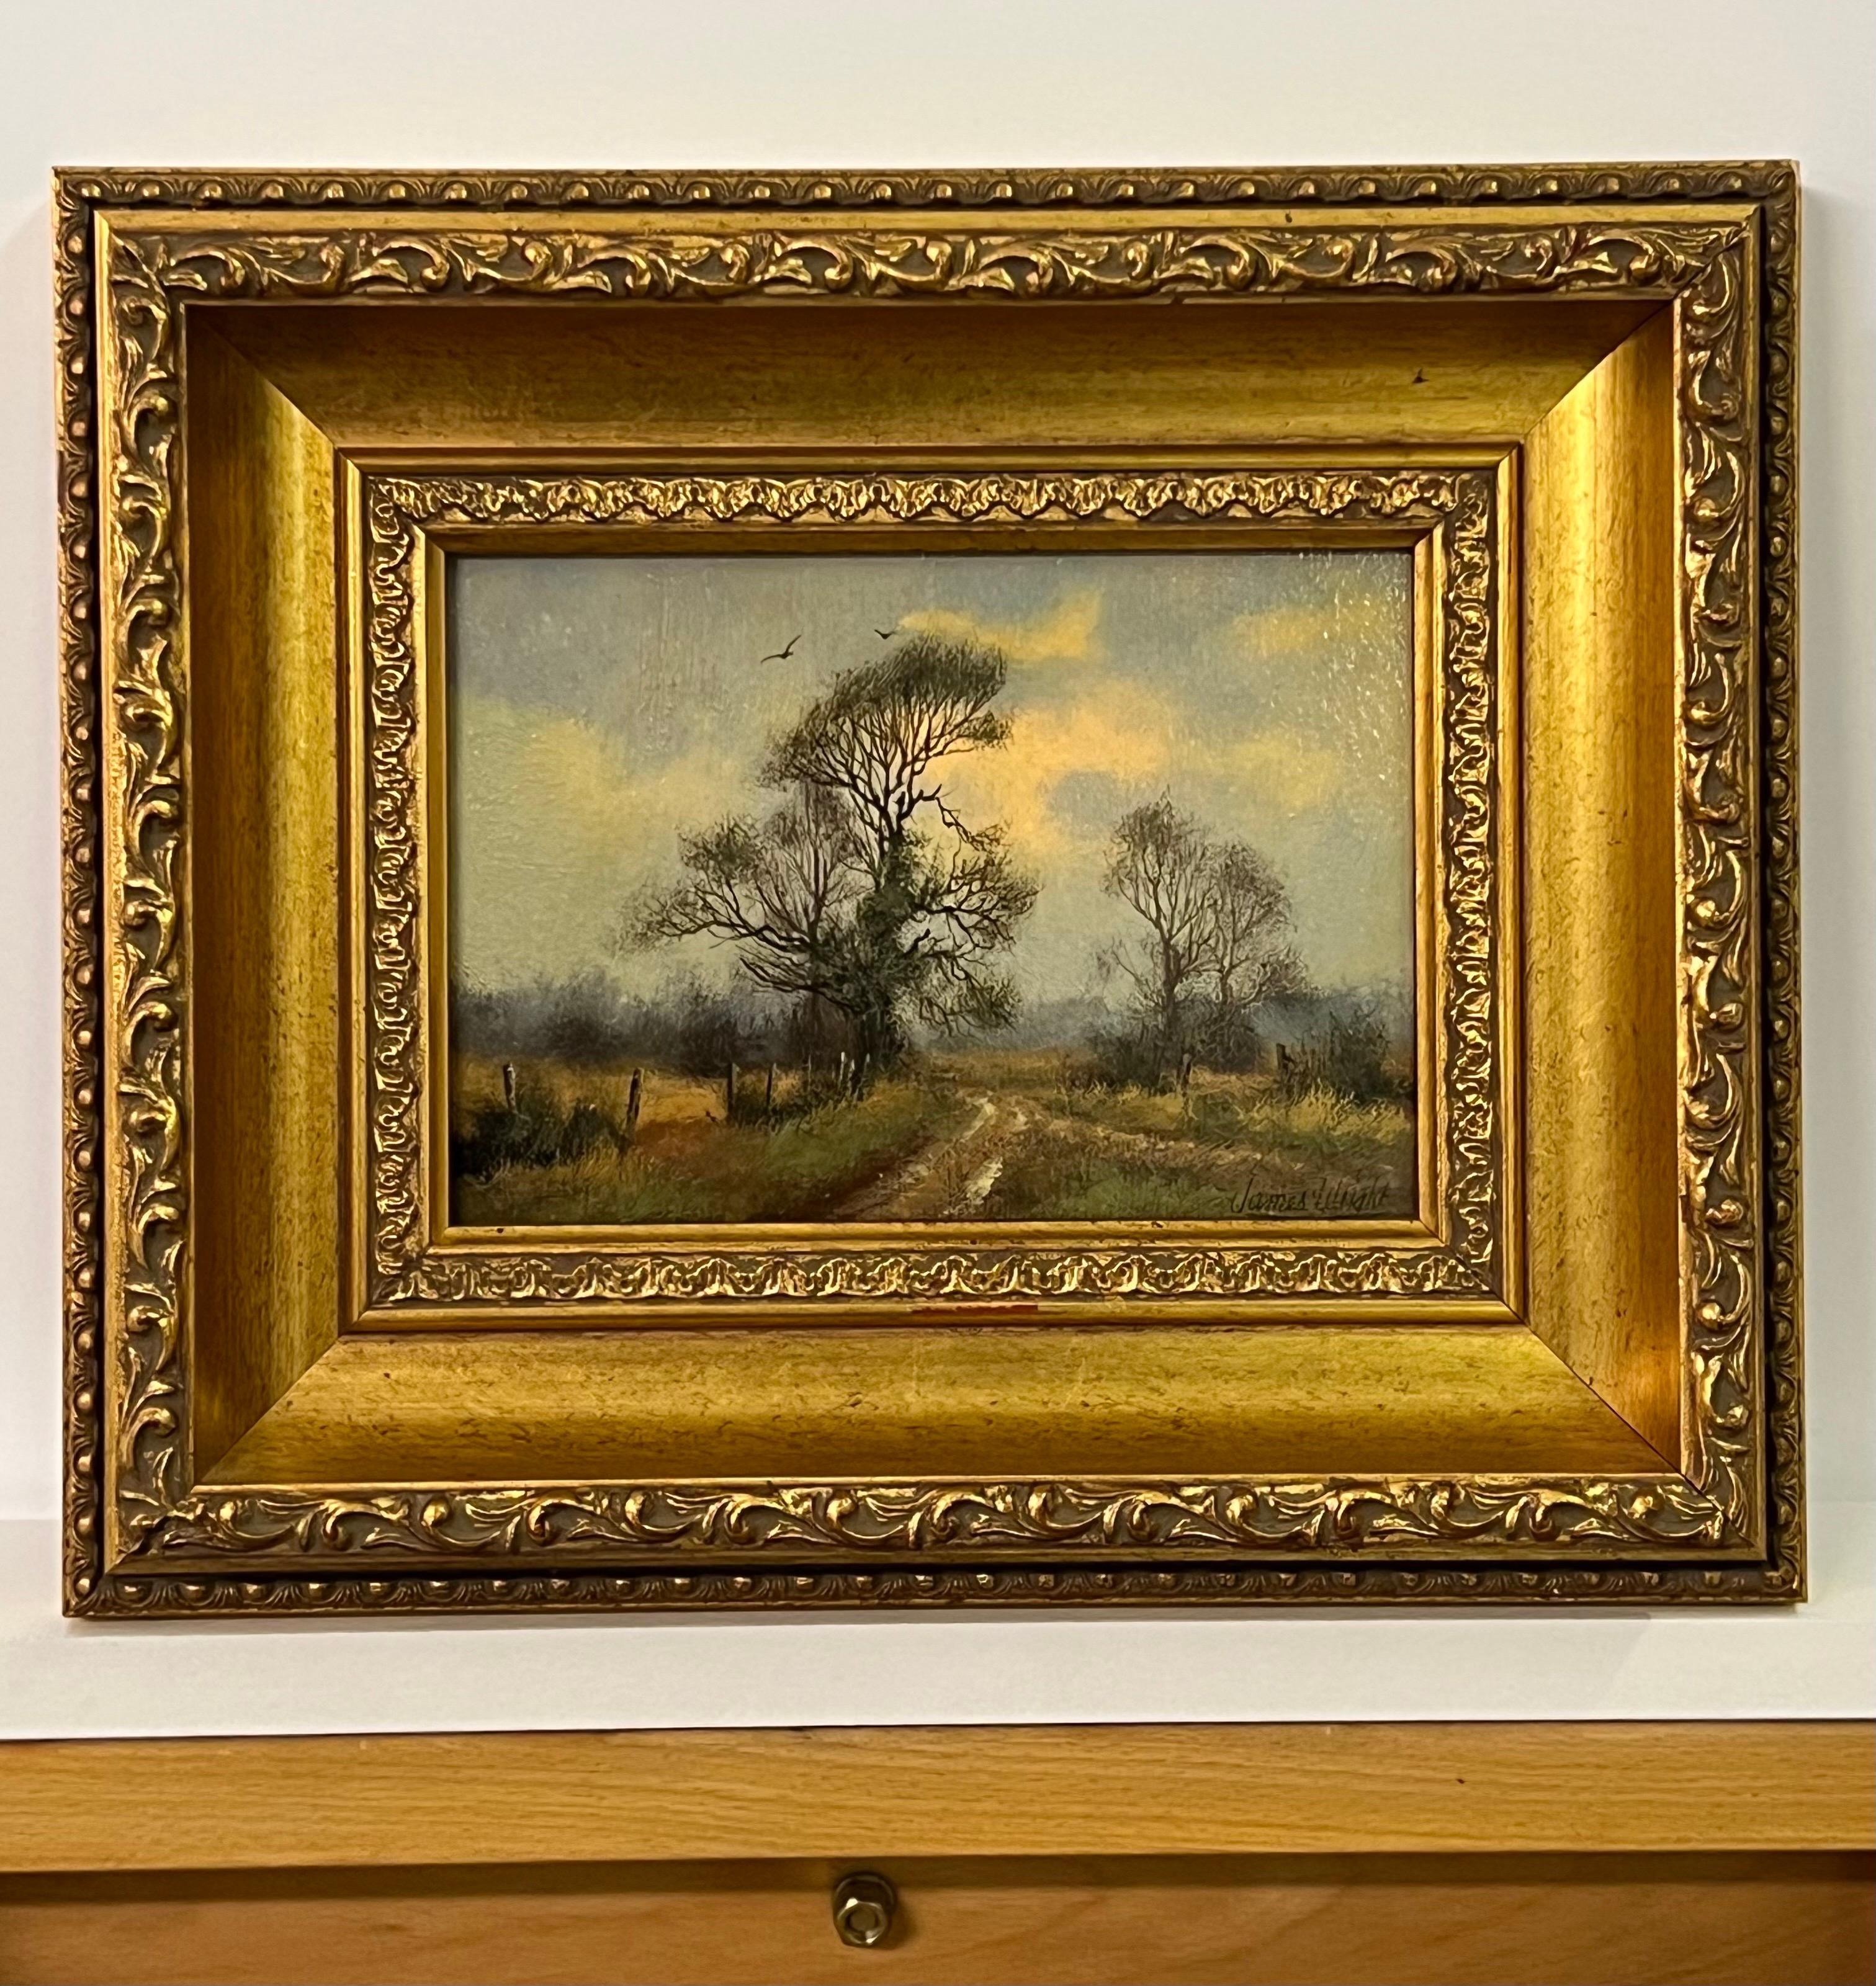 Country Lane with Trees & Birds in English Countryside by 20th Century British Landscape Artist, James Wright 
Signed, Original, Oil on Canvas, housed in a beautiful ornate gold frame. 
Provenance: Part of the English Heritage Series No.71 

Art